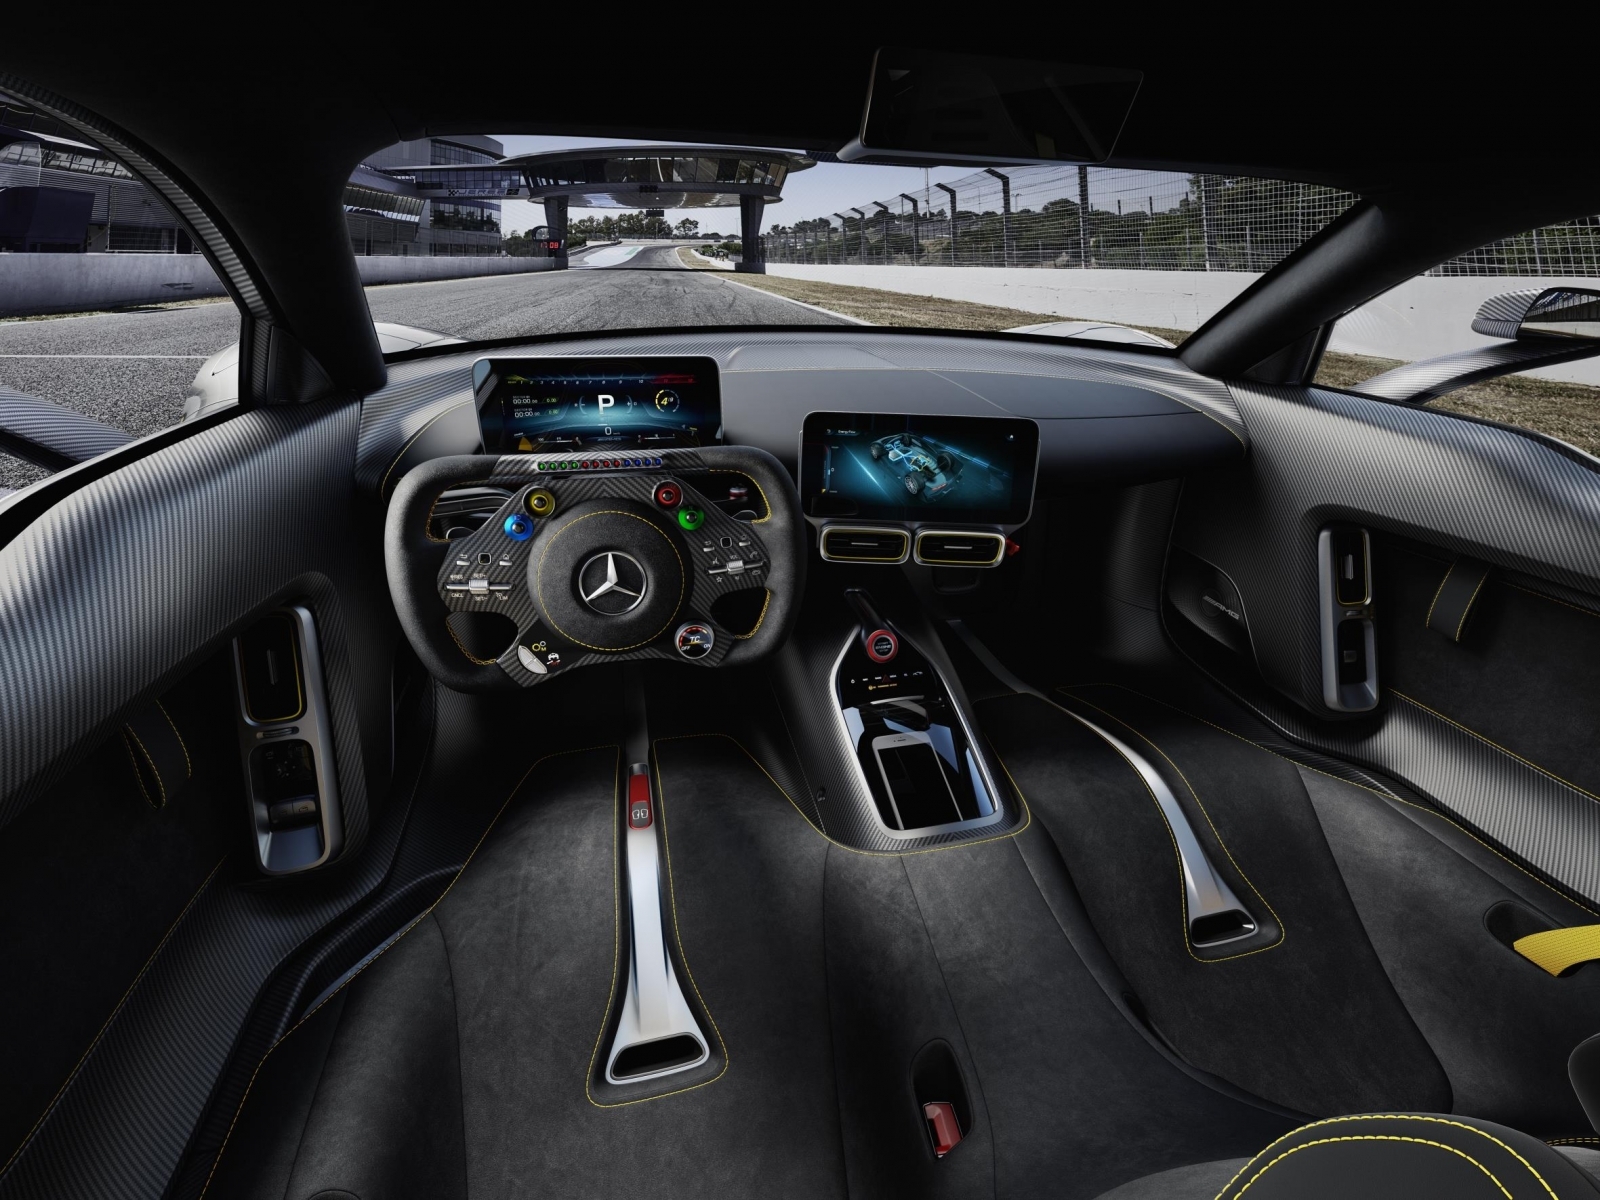 Mercedes-AMG Project One interior